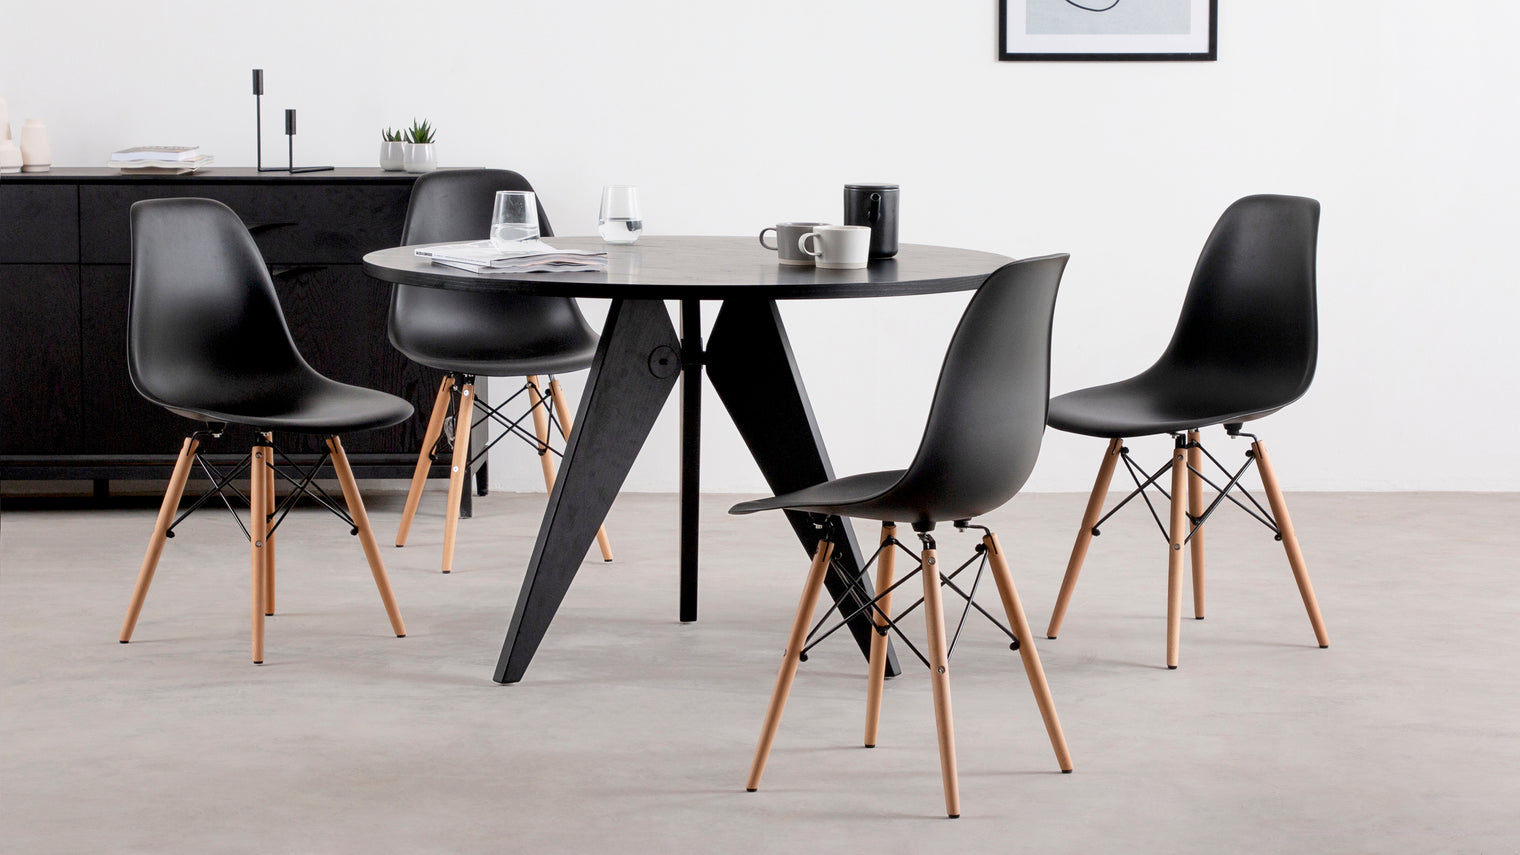 Award-worthy seating|When this iconic chair was launched it won prestigious awards! The designers managed to take a seemingly simplistic chair design and transform it into a piece of ergonomic, comfortable, stylish piece of design history.
